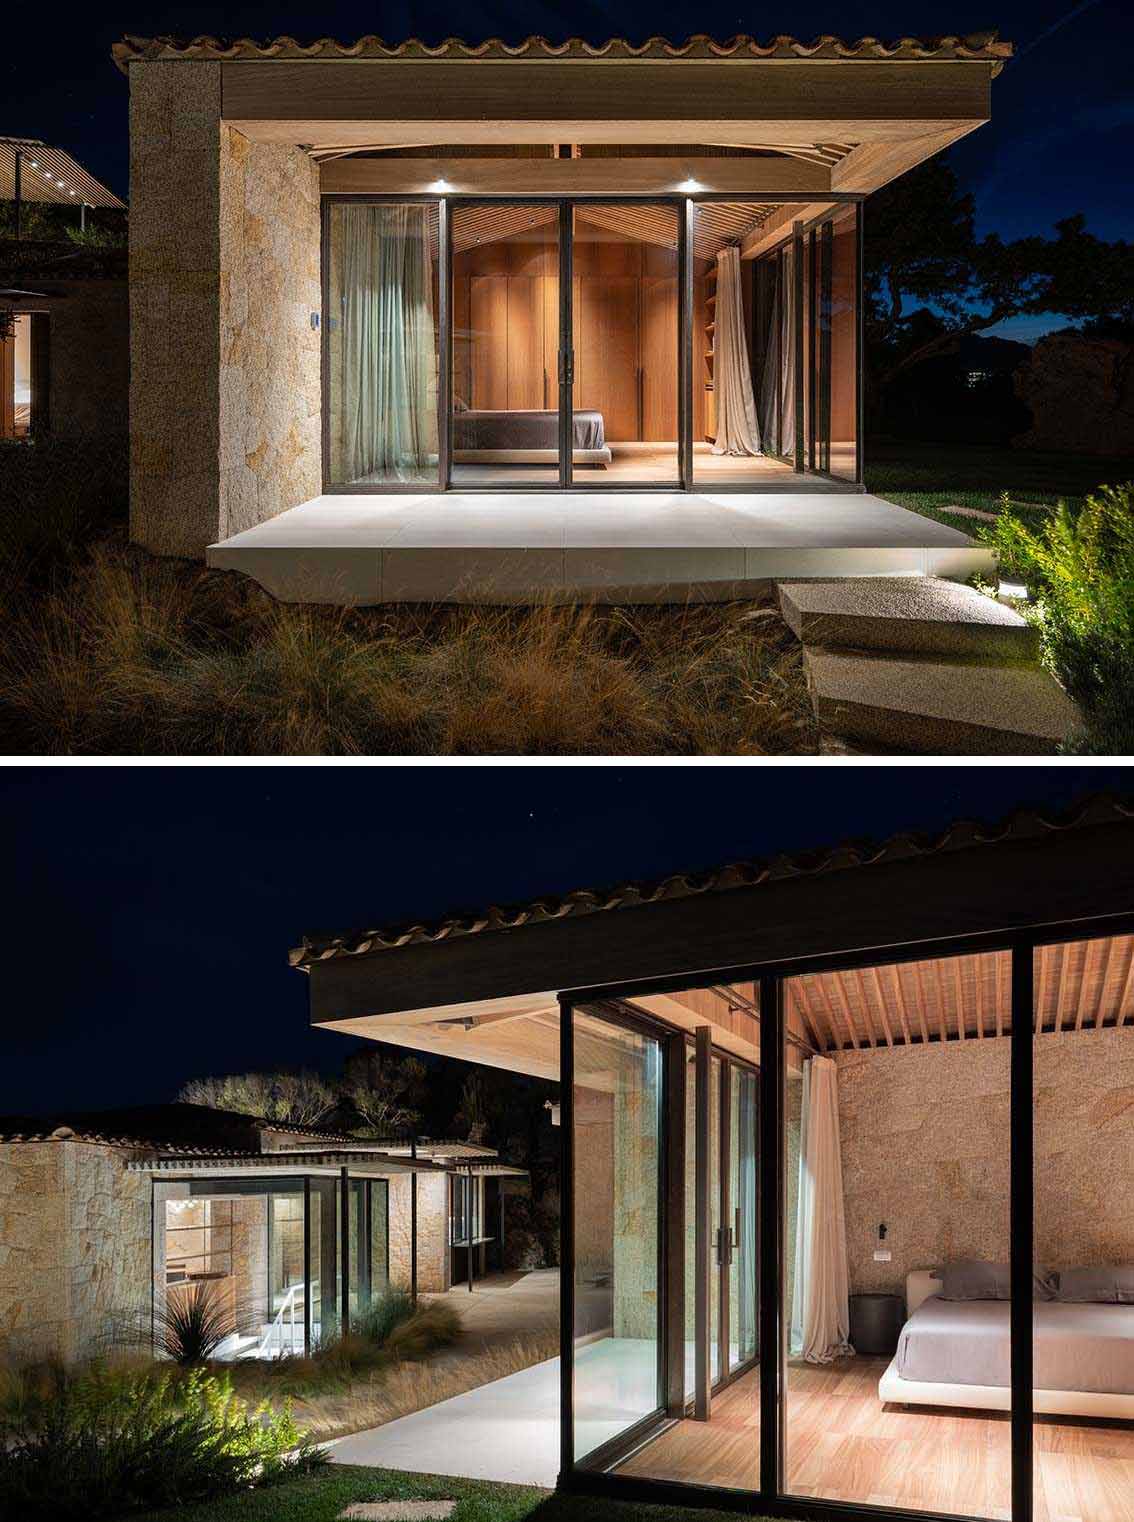 Here's a look at the home at nighttime with exterior lights highlighting the stone and design of the house.